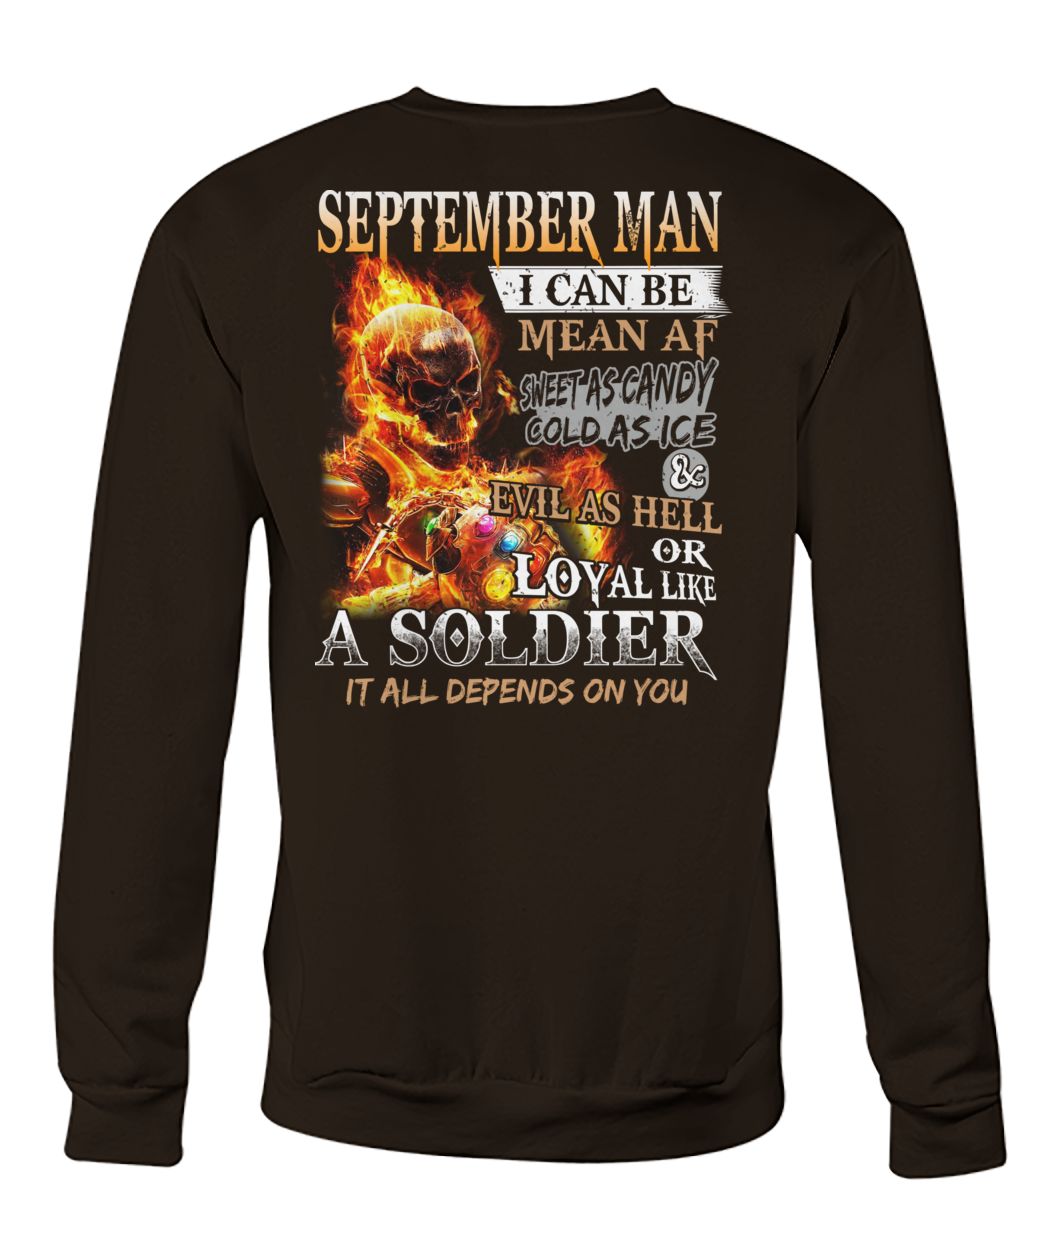 September man I can be mean af sweet as candy gold as ice and evil as hell crew neck sweatshirt